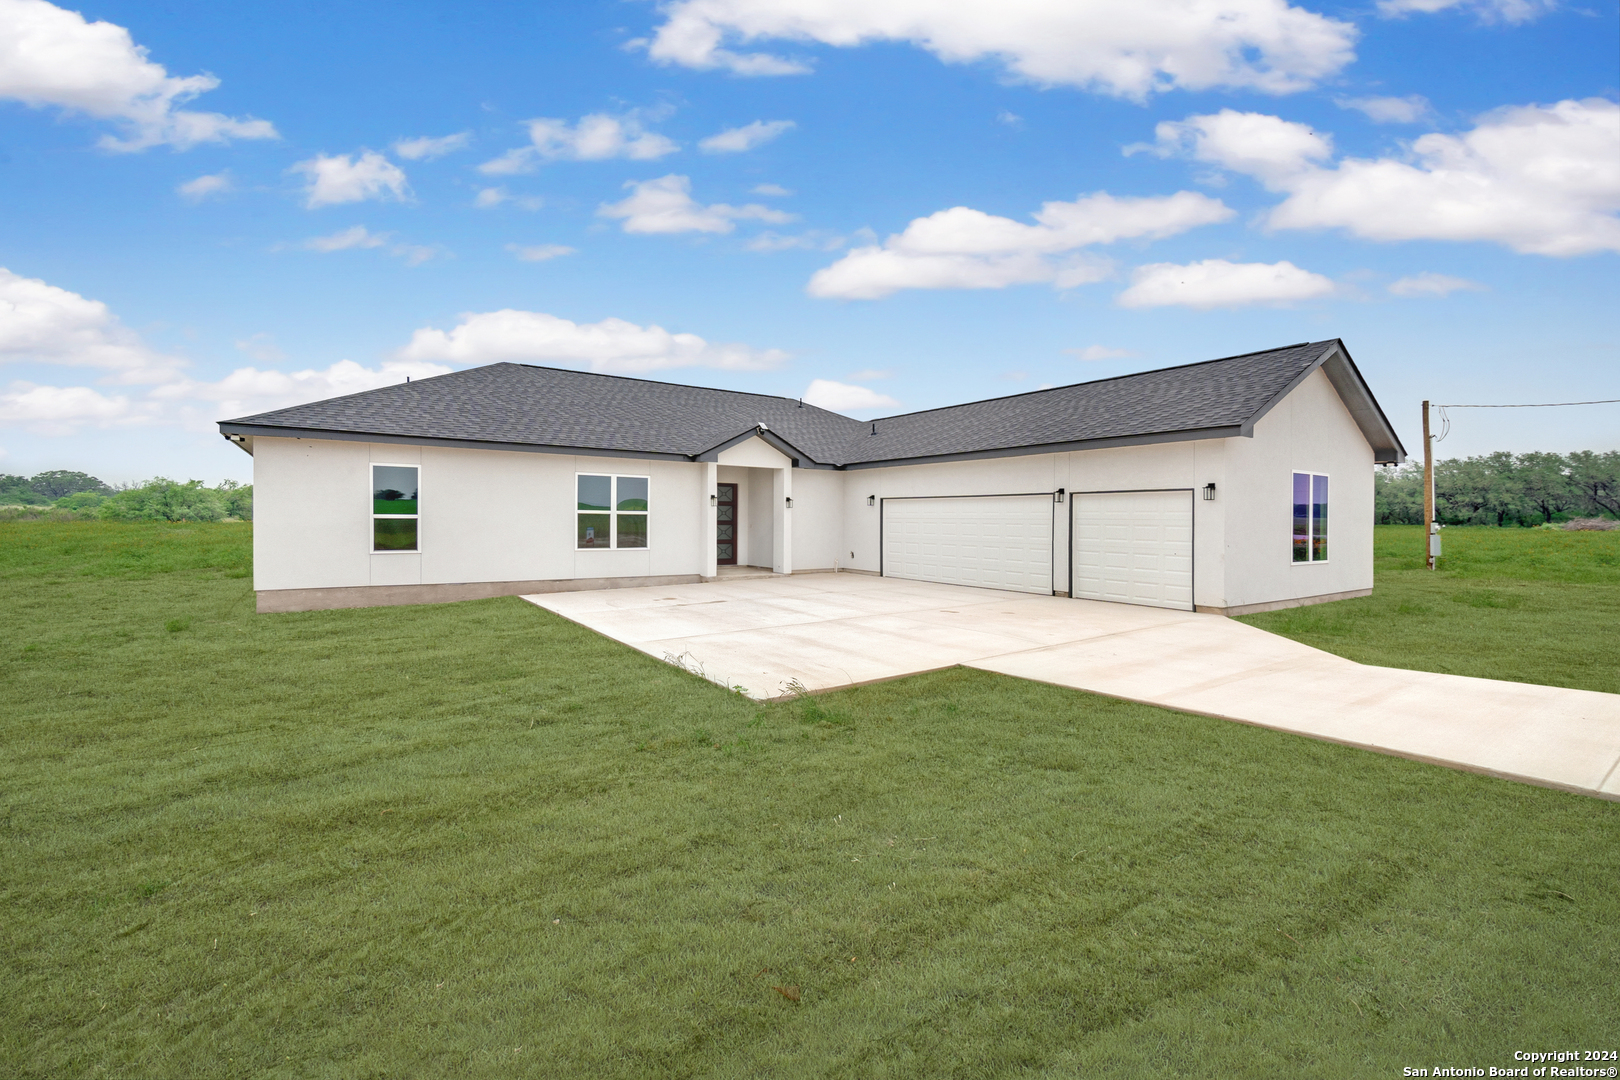 Photo of 621 Eichman in Poteet, TX